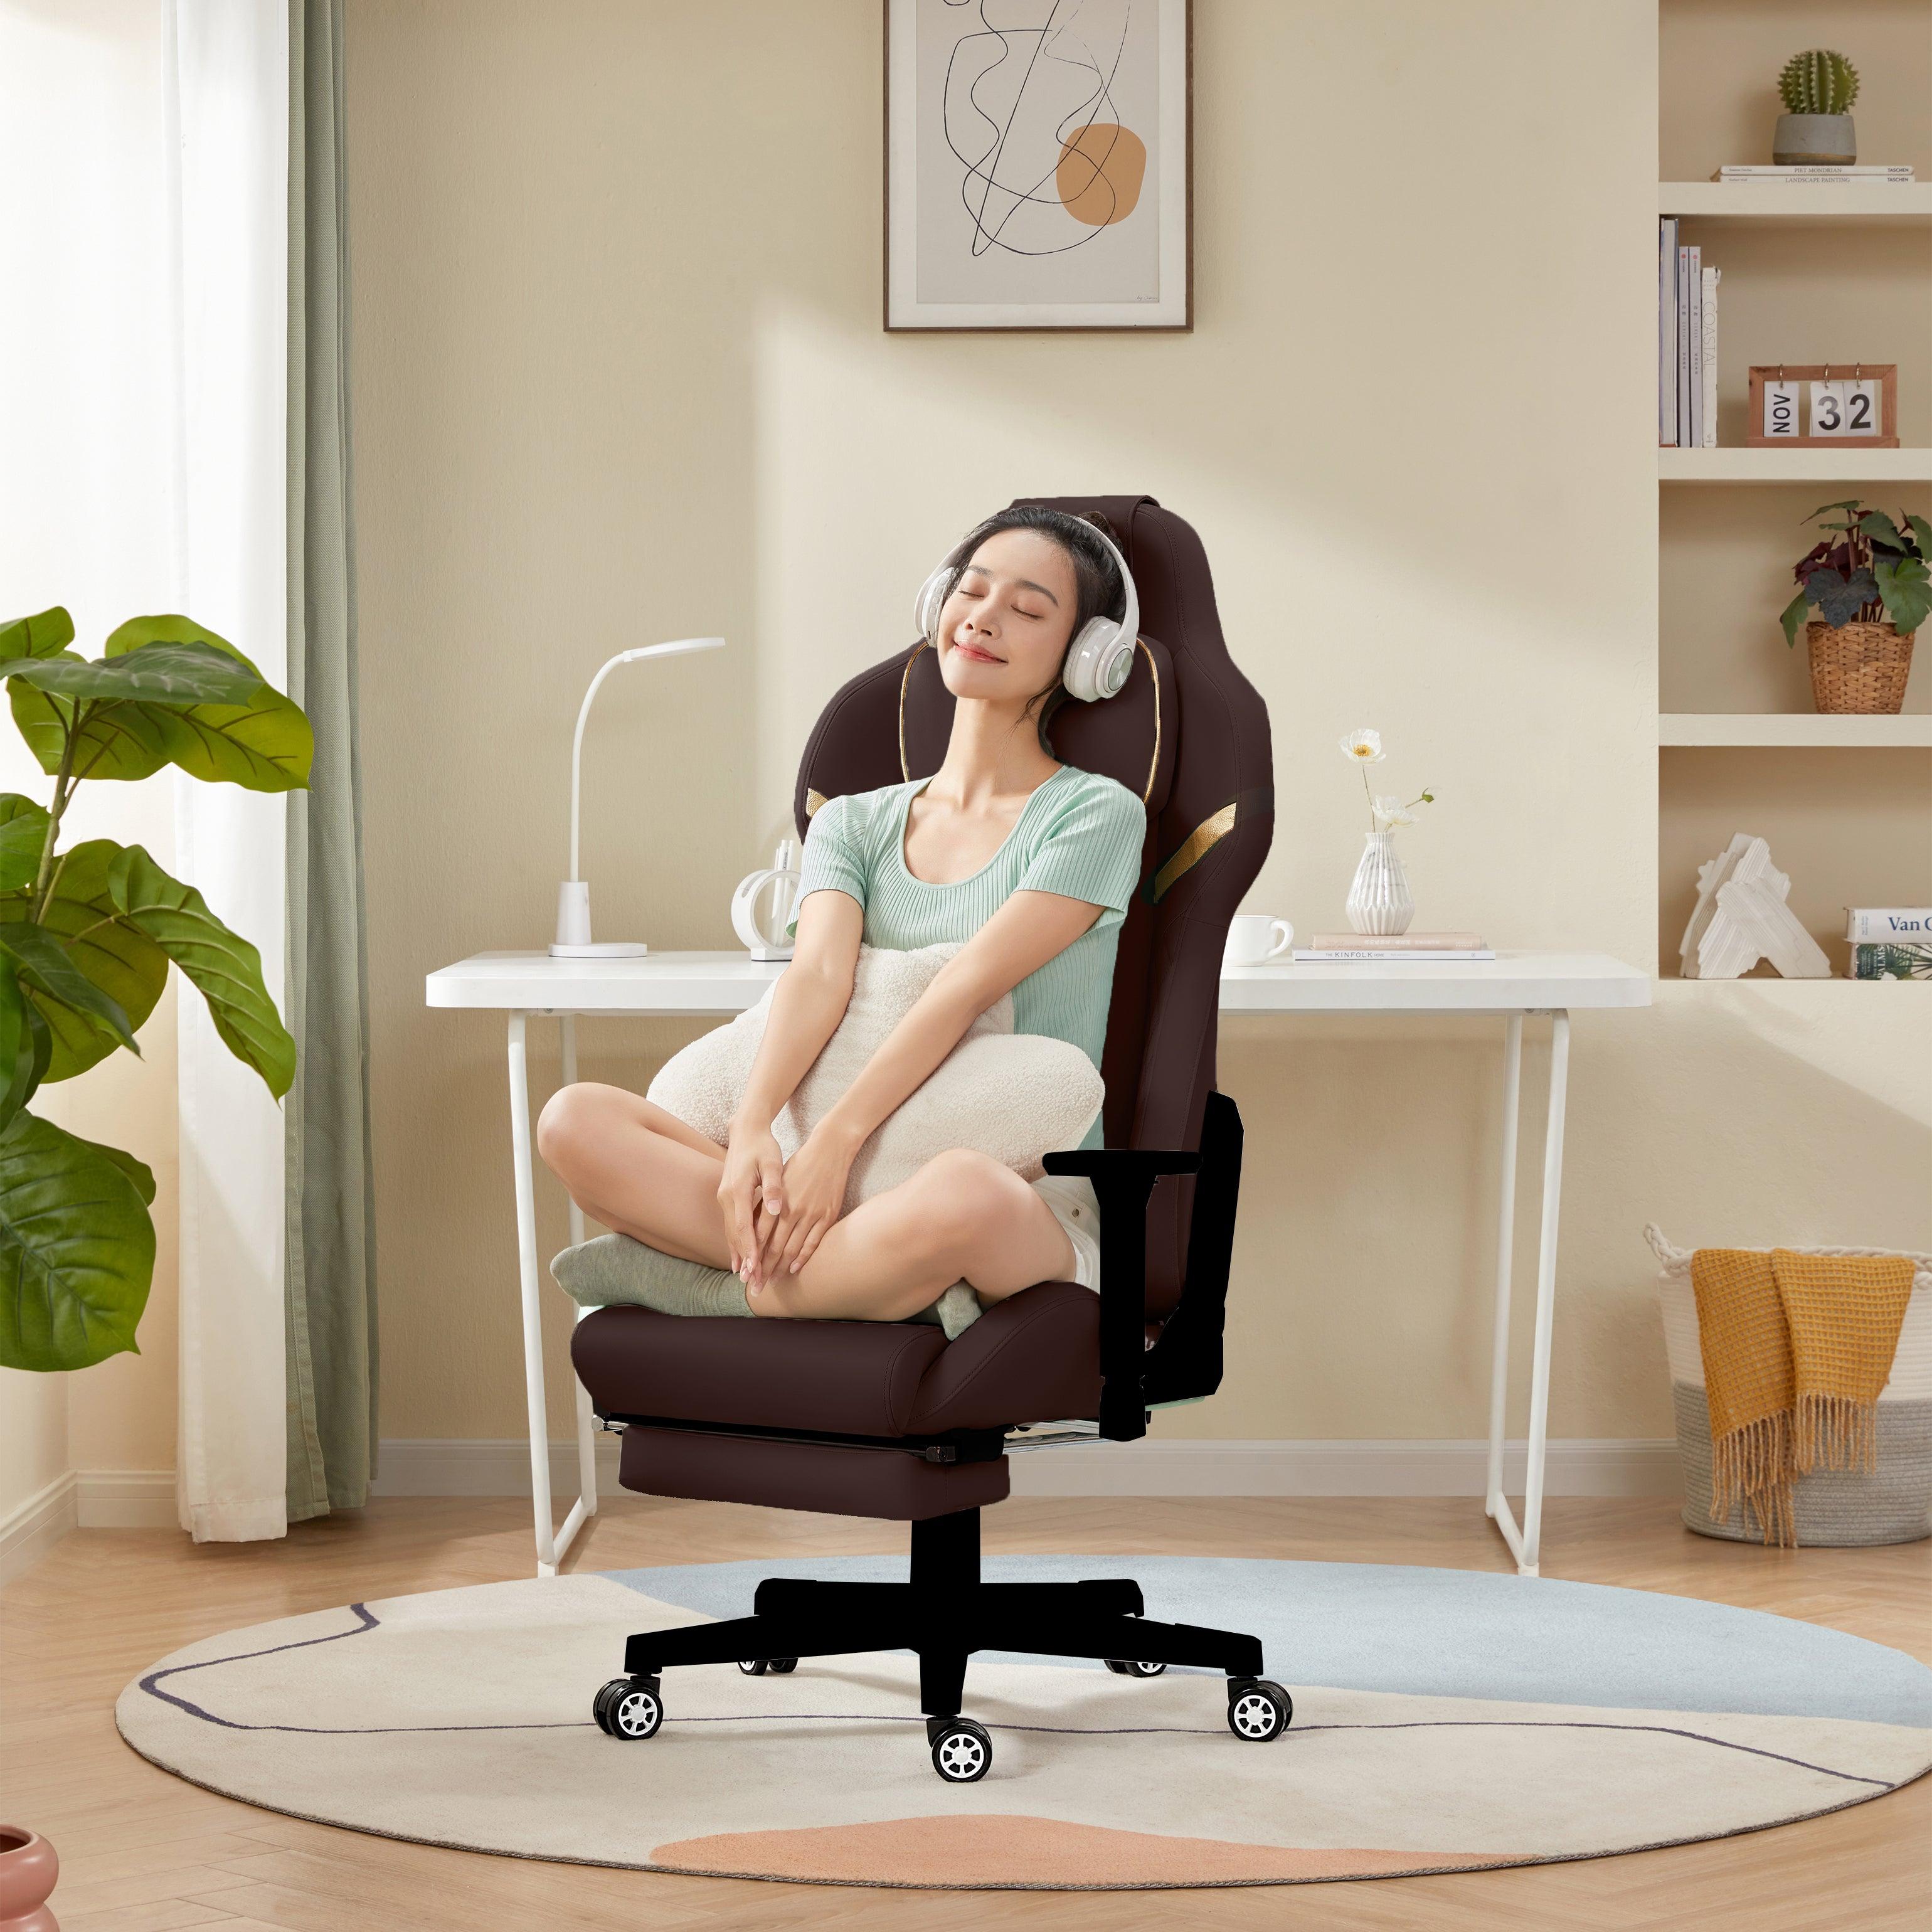 Woman relaxing on a brown office massage chair in a cozy home office setting with plants and decor.